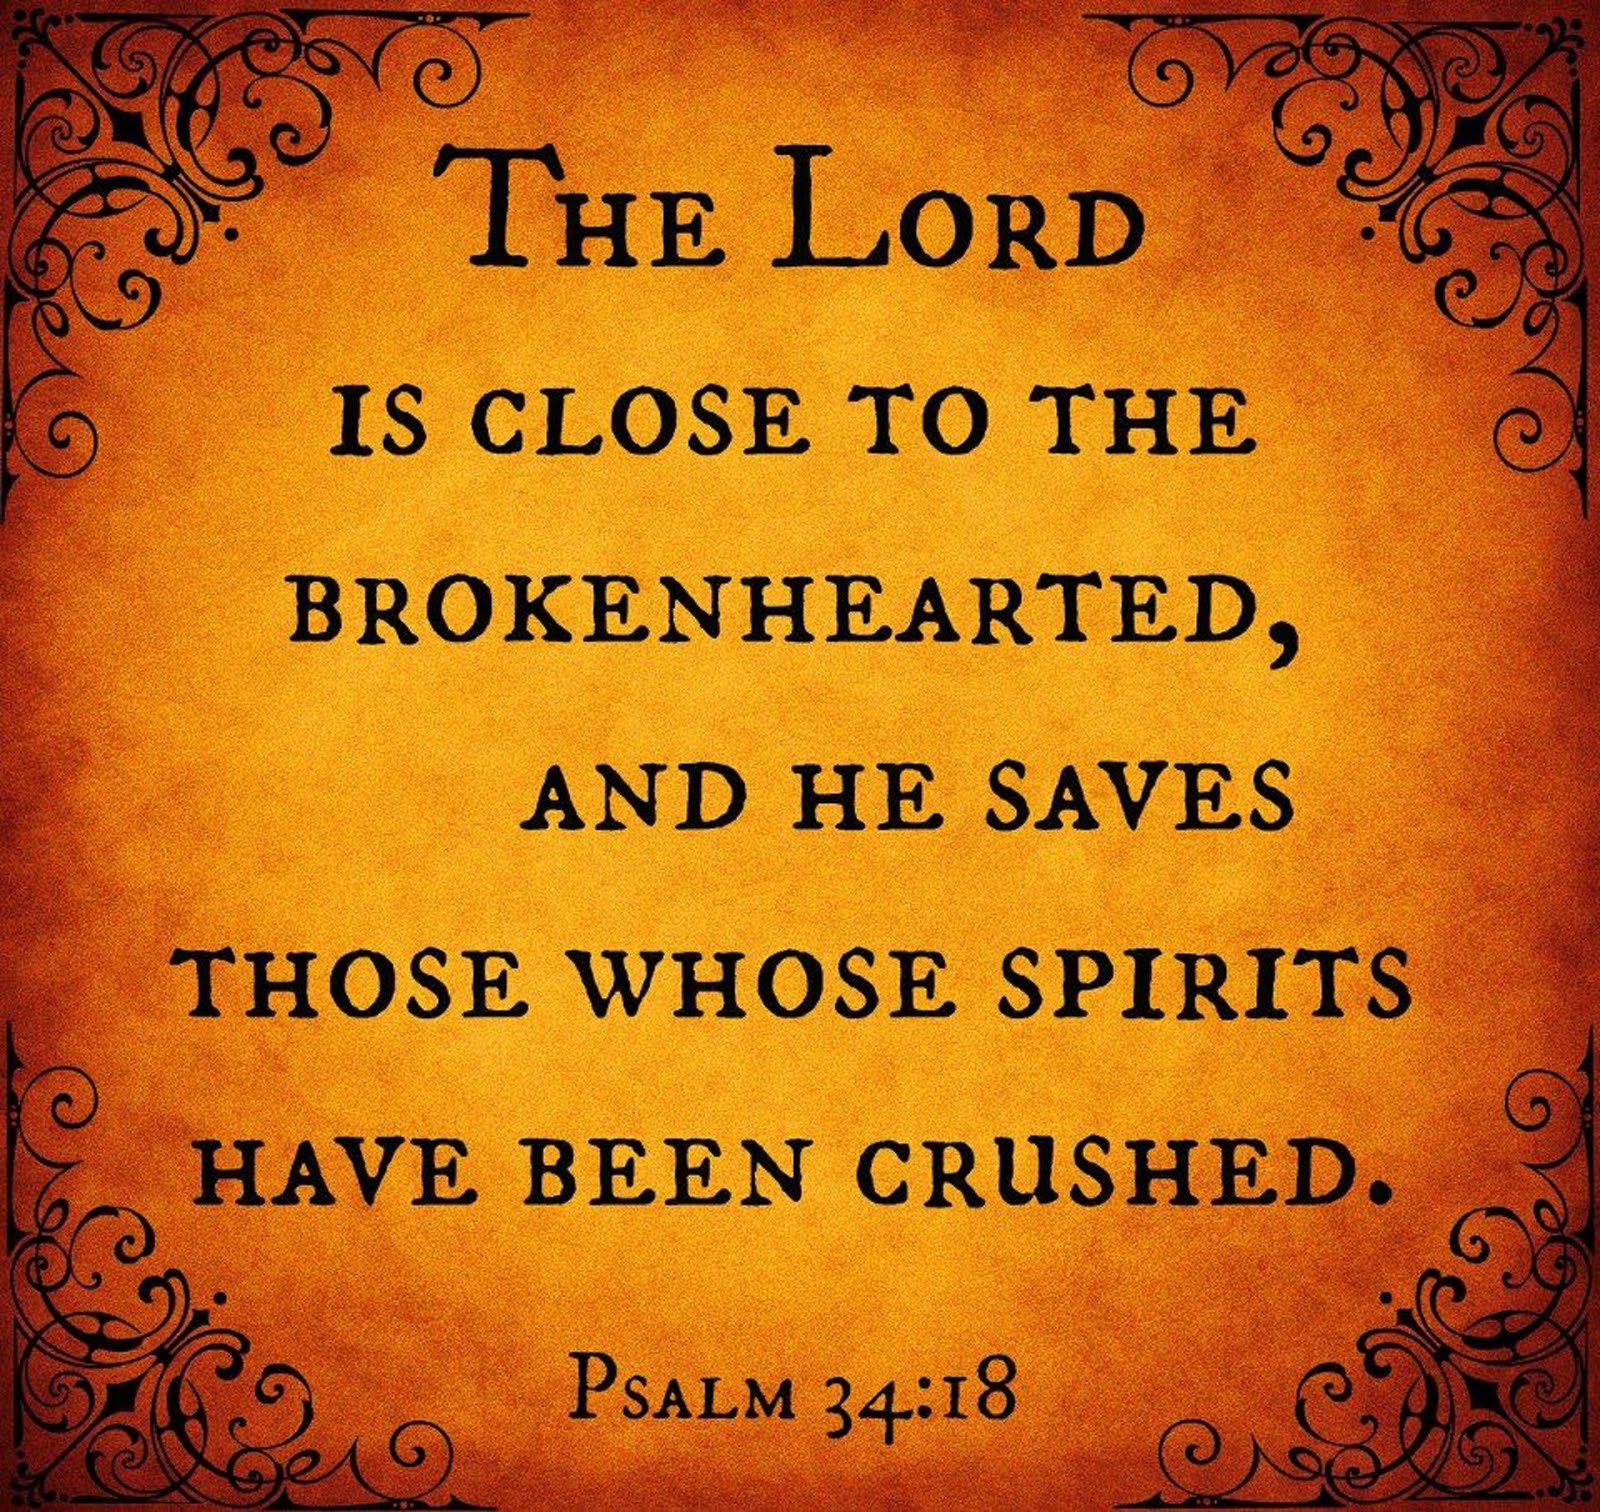 THE LORD IS CLOSE TO THE BROKEN HEARTED